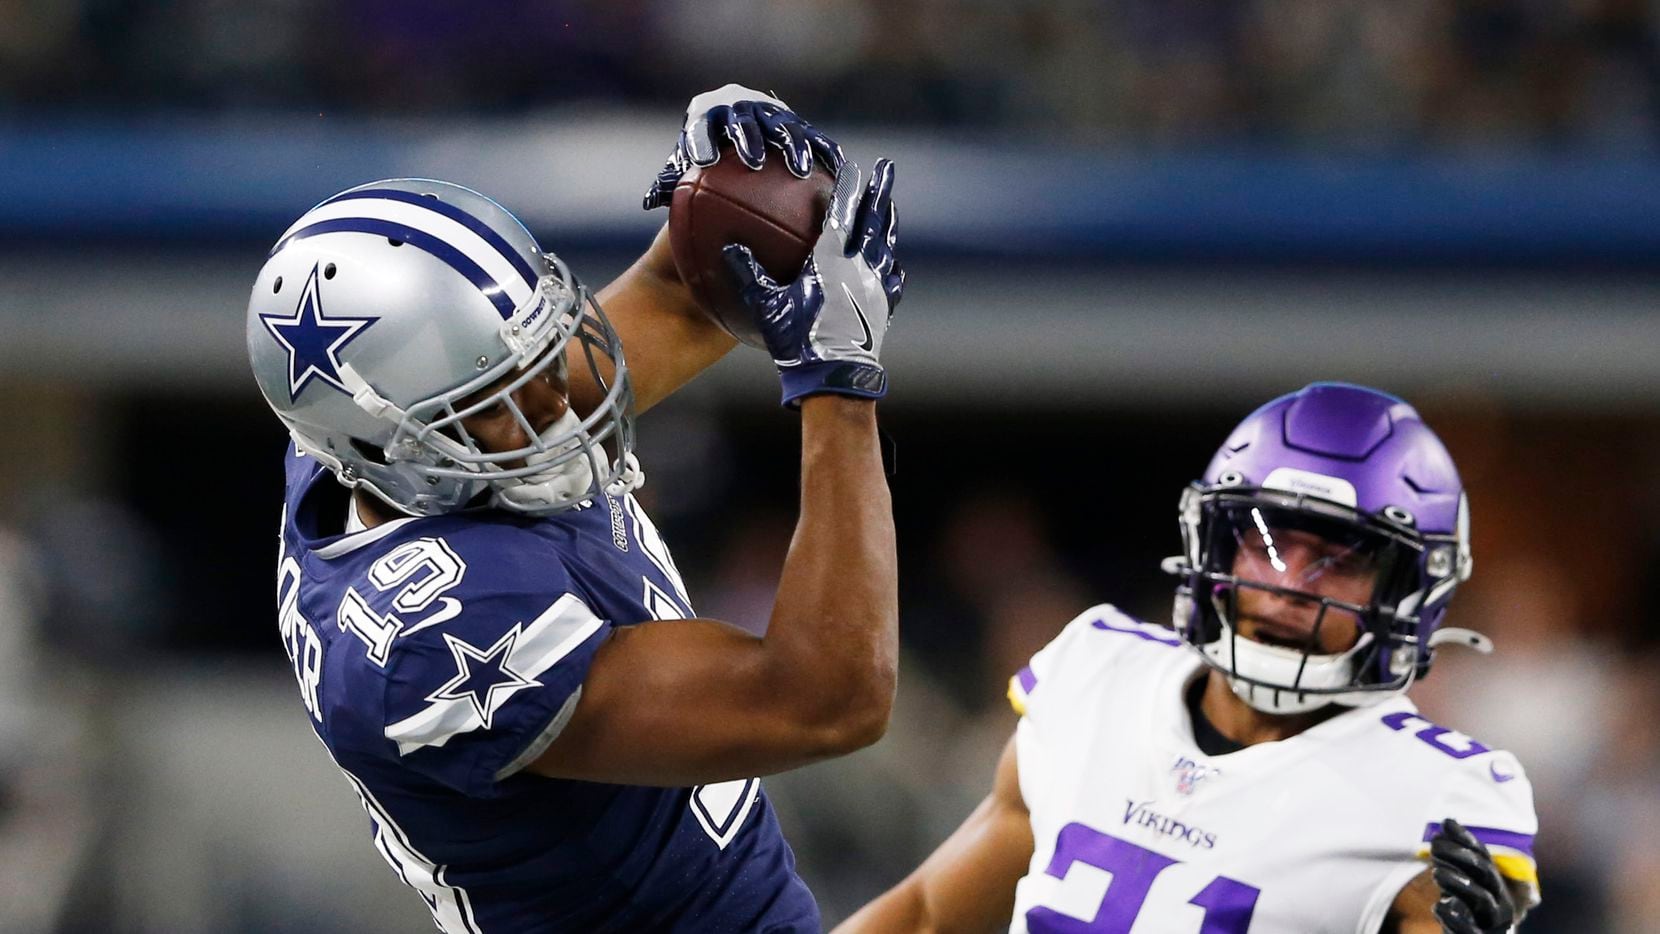 Dallas Cowboys wide receiver Amari Cooper (19) makes a catch in front of Minnesota Vikings cornerback Mike Hughes (21) for a first down during the first half of play at AT&T Stadium in Arlington, Texas on Sunday, November 10, 2019. (Vernon Bryant/The Dallas Morning News)